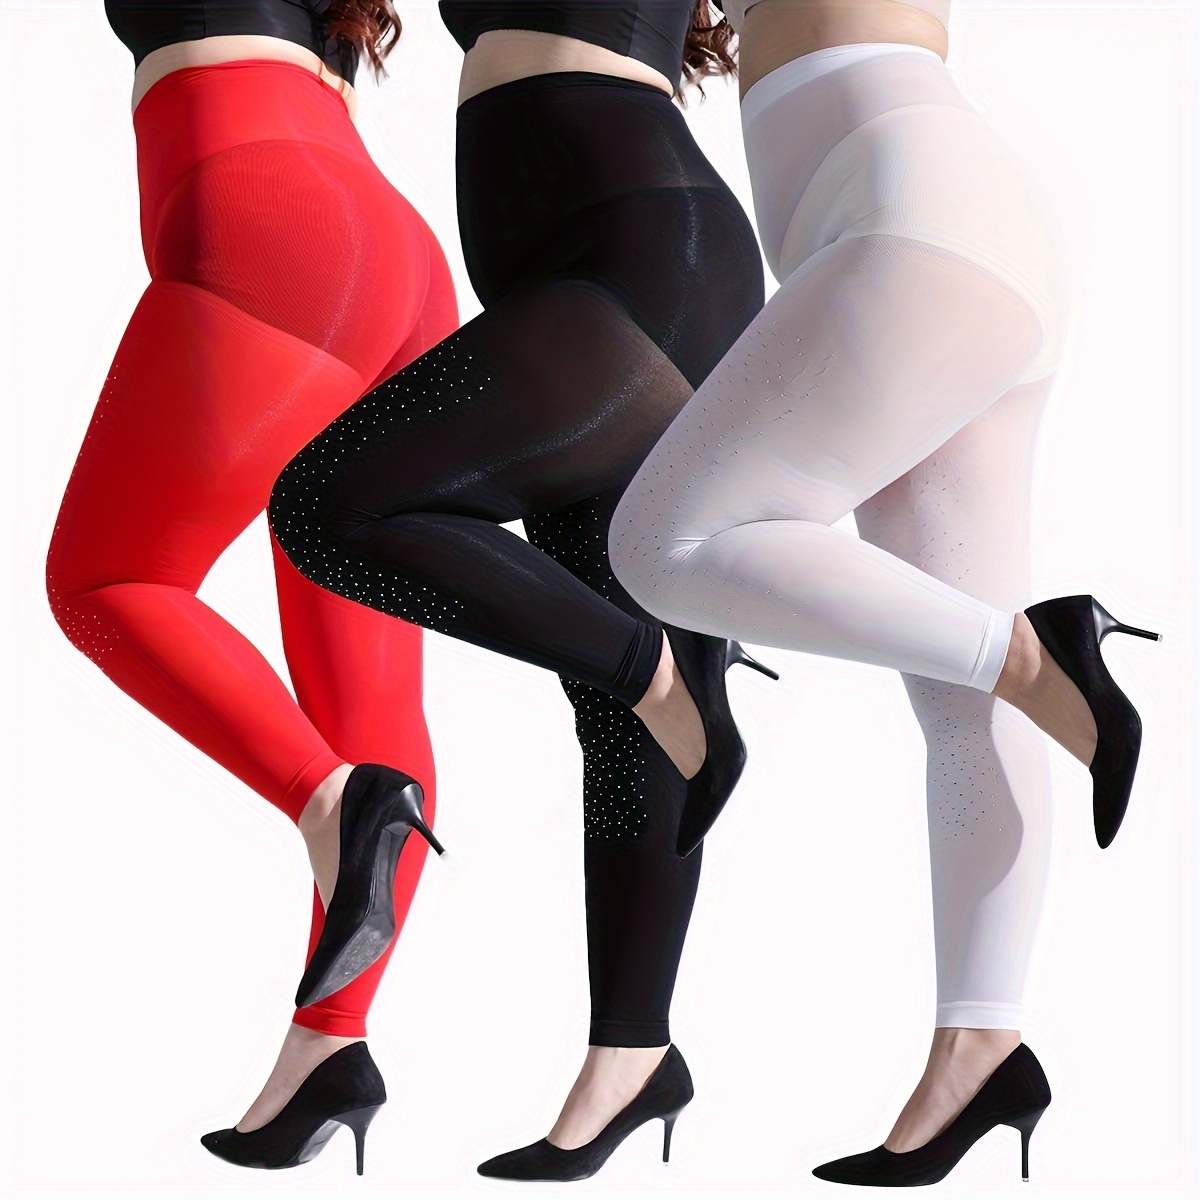 Mens Glossy Cutout Crotchless Pantyhose Slim Tights Stockings Pants  Underwear